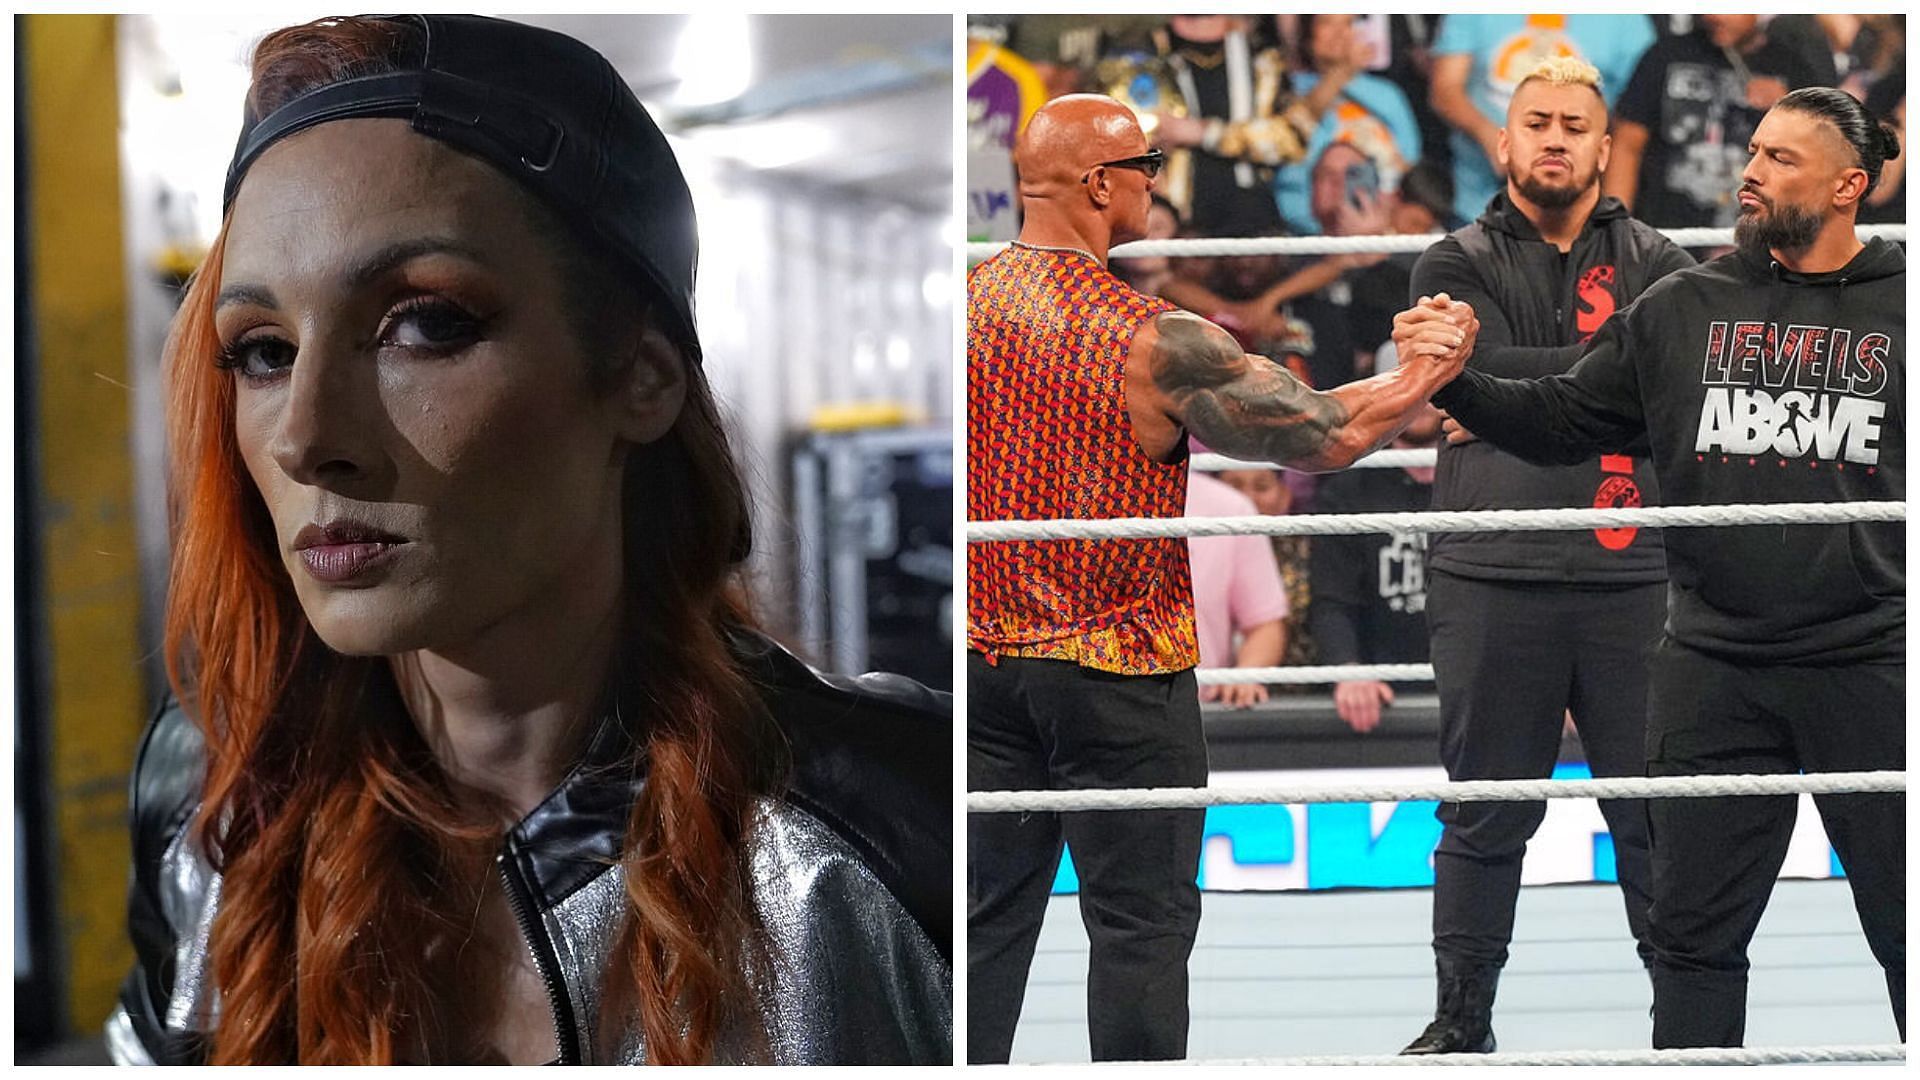 Becky Lynch (left) and The Bloodline members on WWE SmackDown (right).